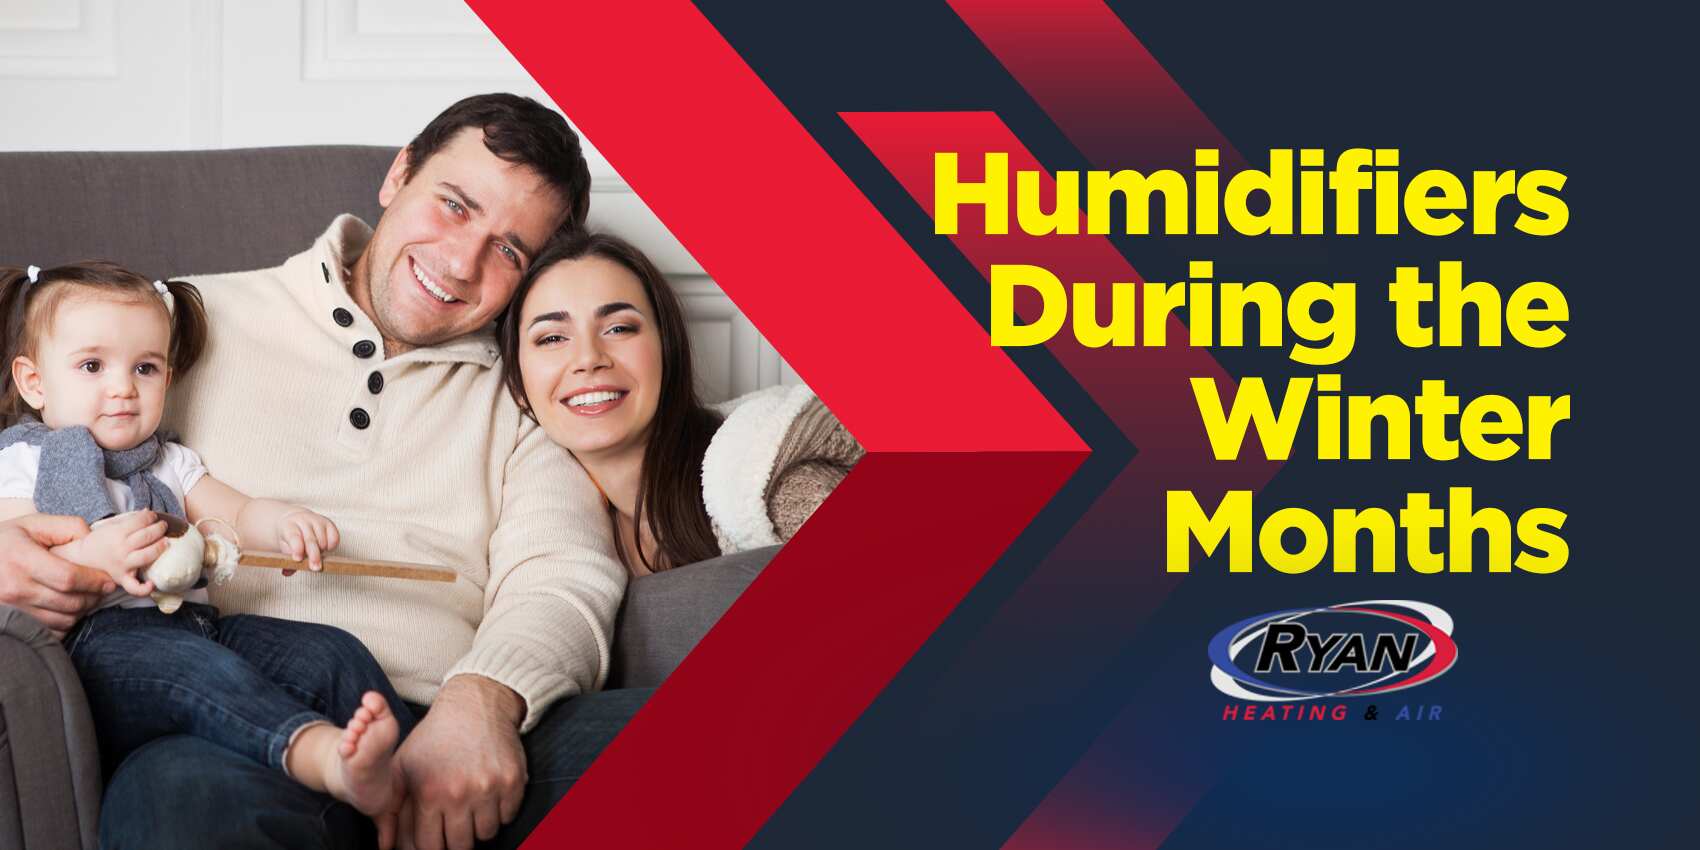 Humidifiers During the Winter Months with photo of happy family sitting on the couch